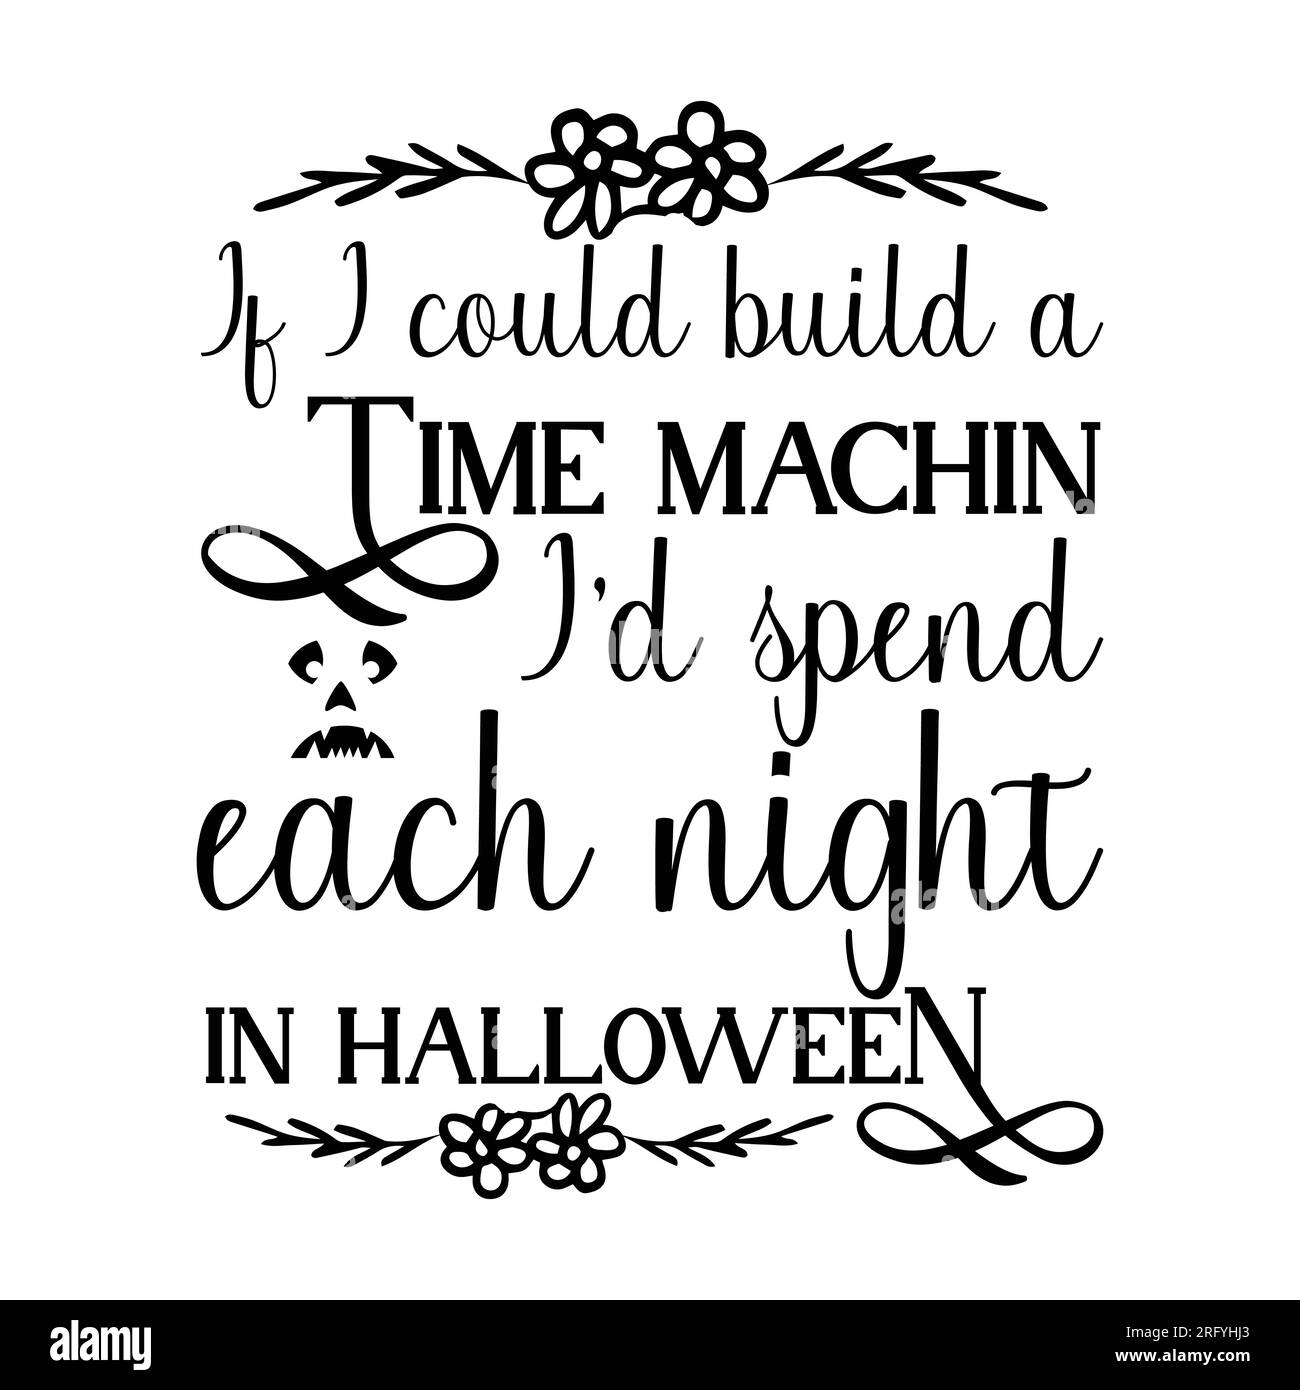 If I could build a time machin i'd spend each night in halloween, typography t shirt design, tee print, t-shirt design, lettering t shirt design, Silh Stock Vector